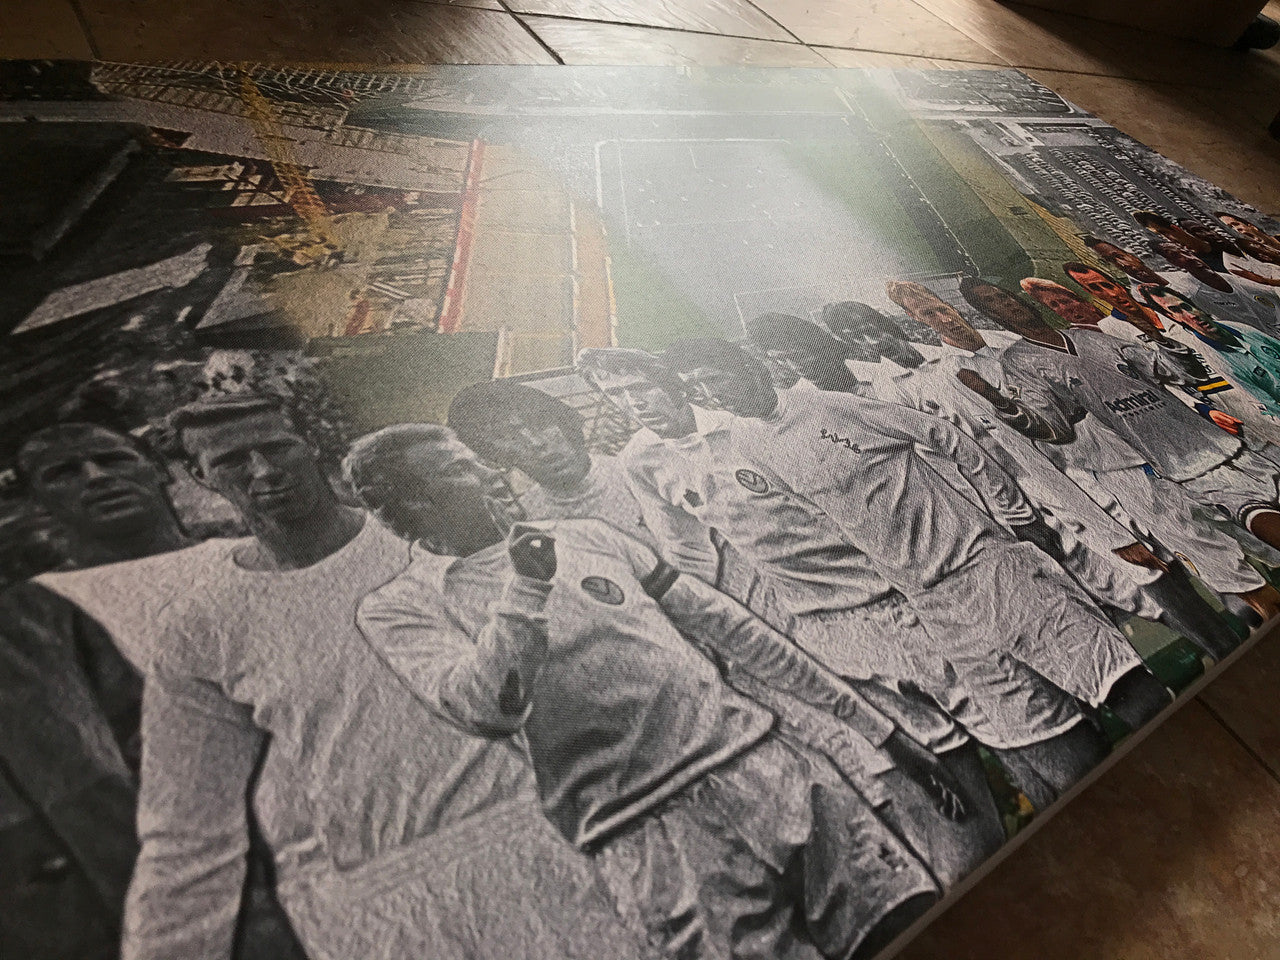 LUFC Panoramic KiSS Canvas - Leeds United Football MOT - Timeline - Then and Now - Unique Artwork - Football Elland Road Wall Art